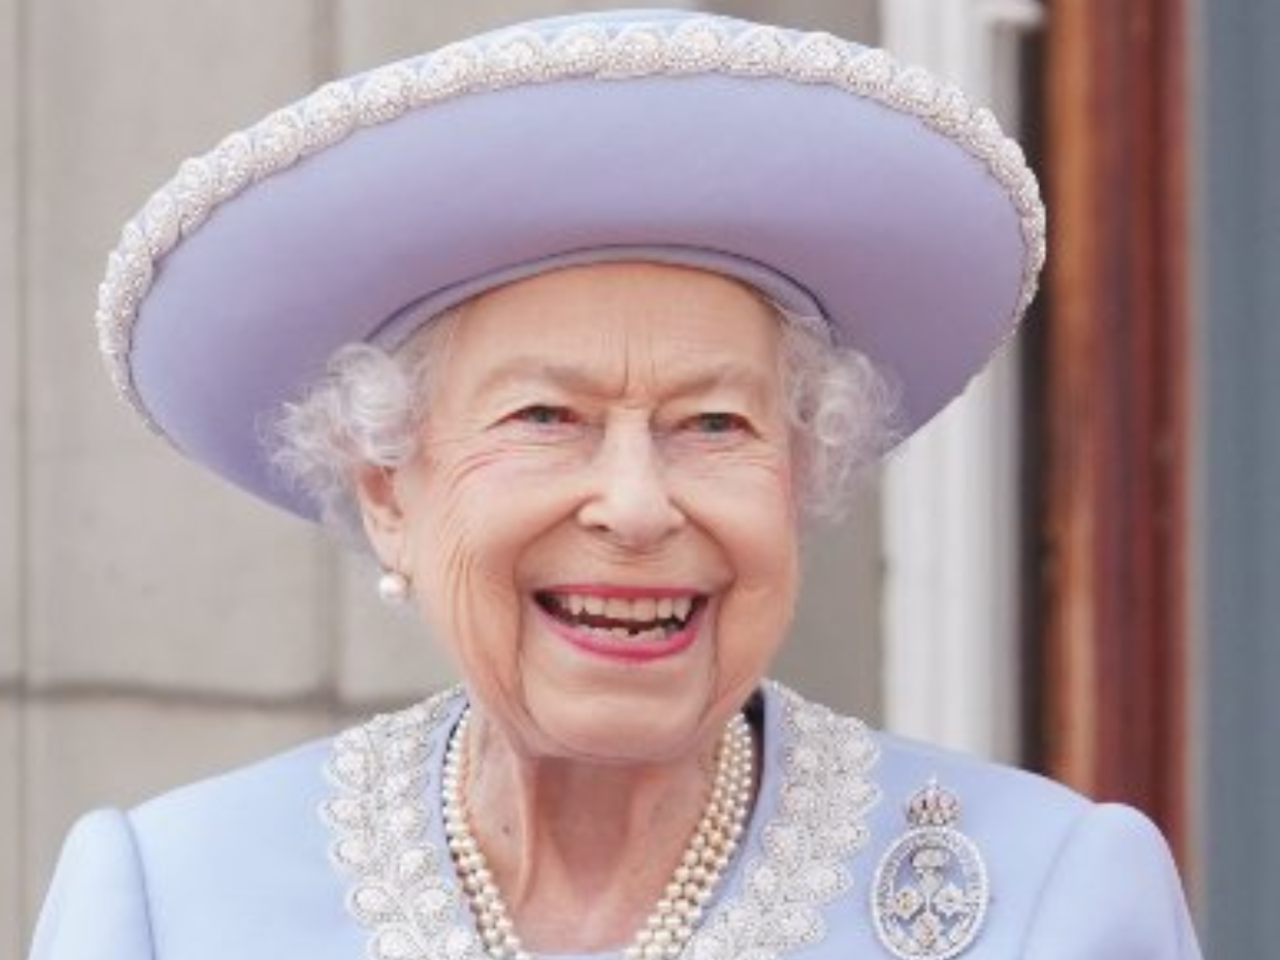 Formal steps after instant shift from UK queen to king - Times of India